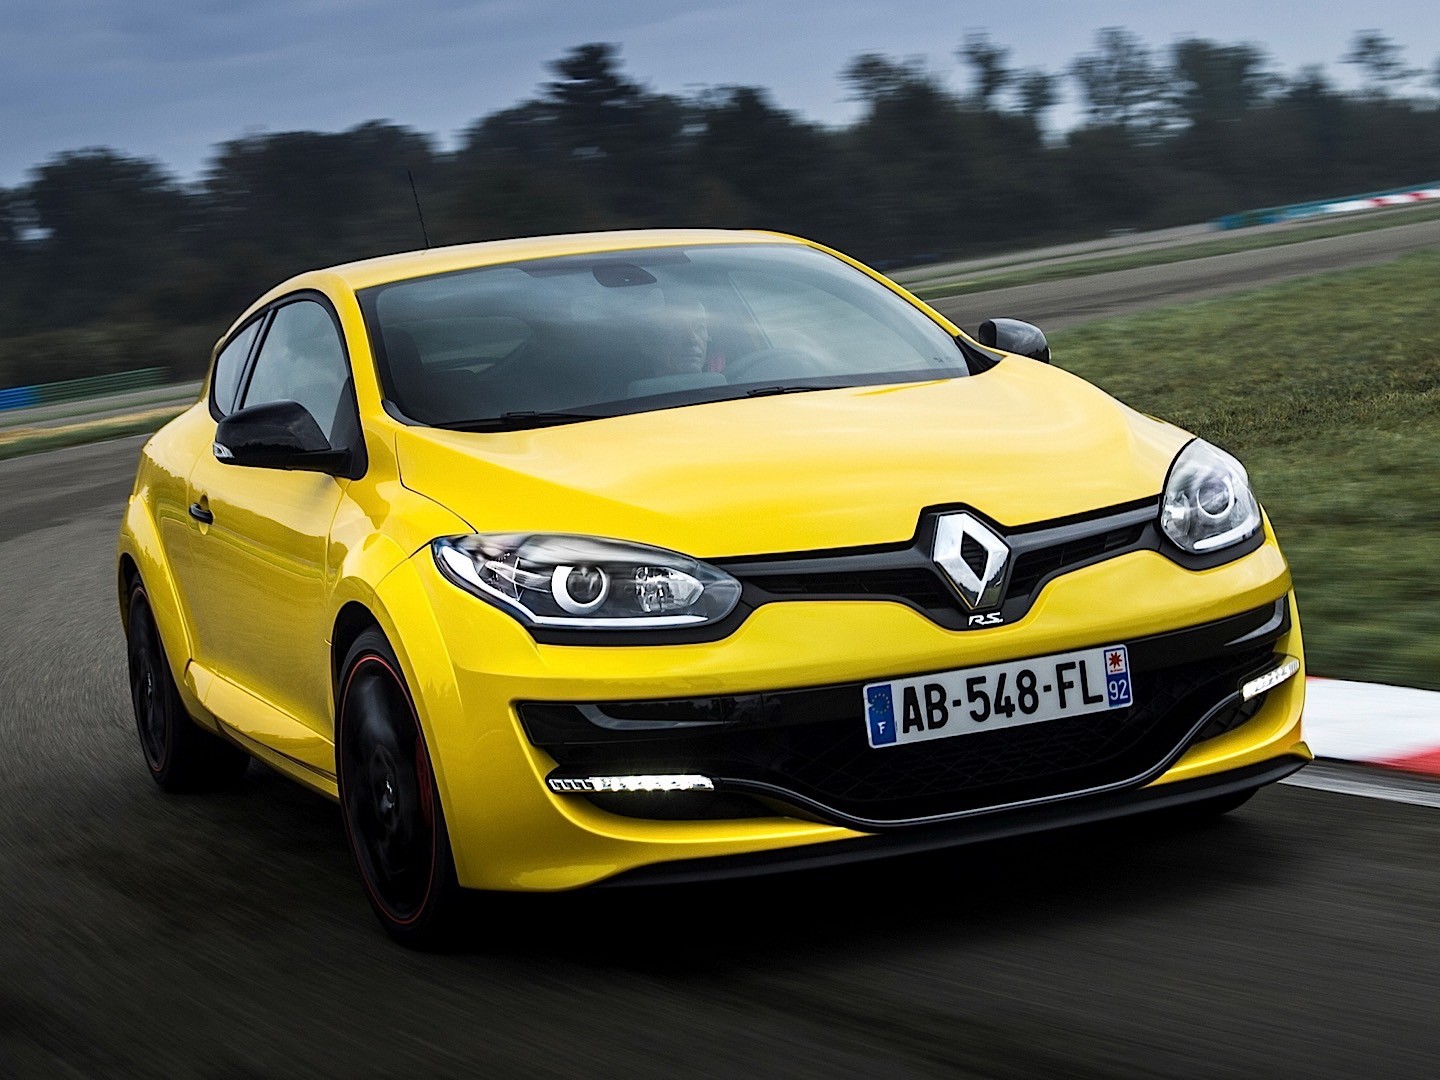 Amazing 2014 Renault Mégane RS Pictures & Backgrounds